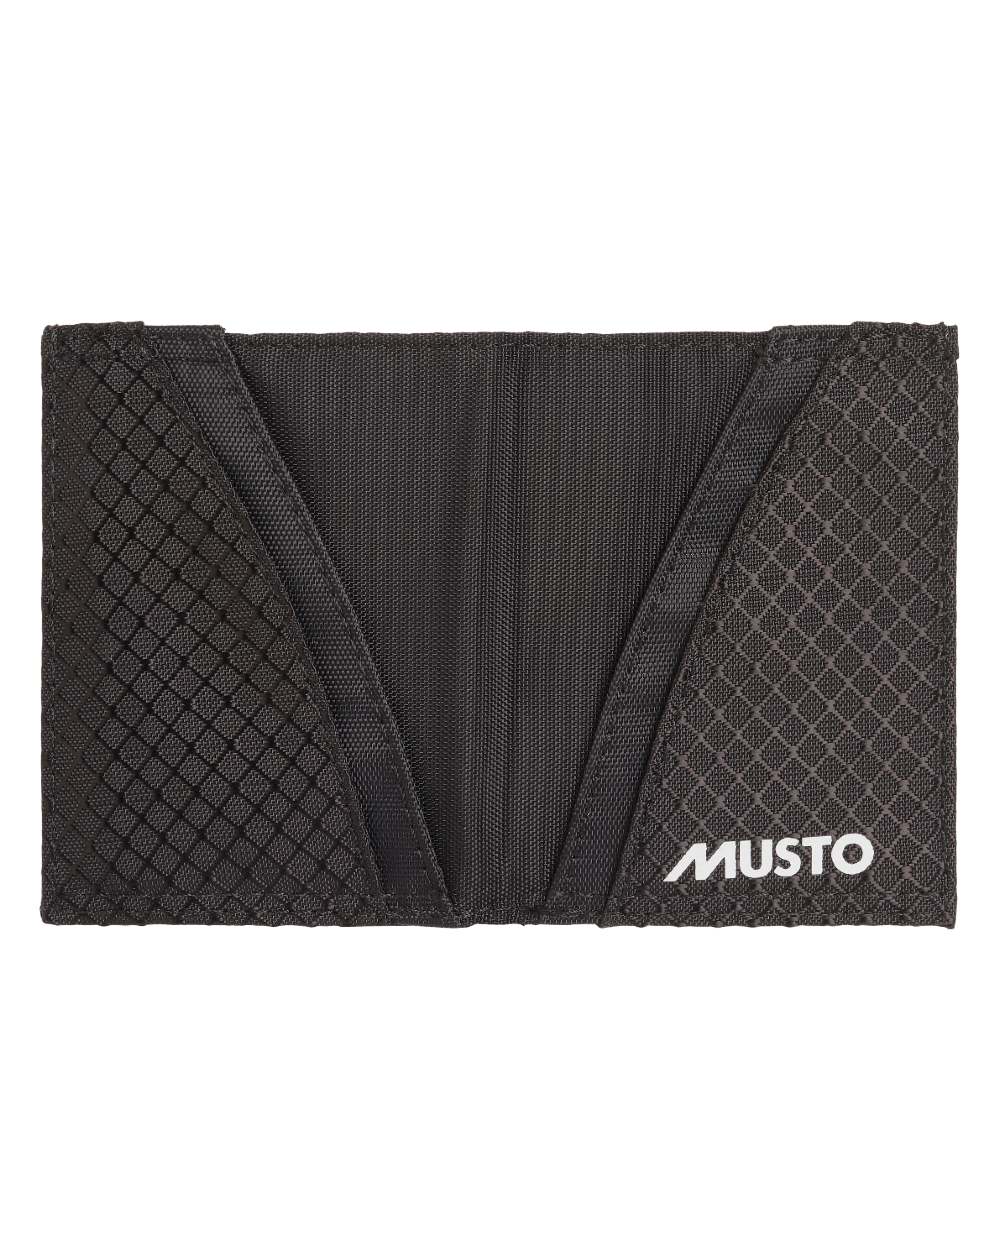 Black Coloured Musto Essential Wallet On A White Background